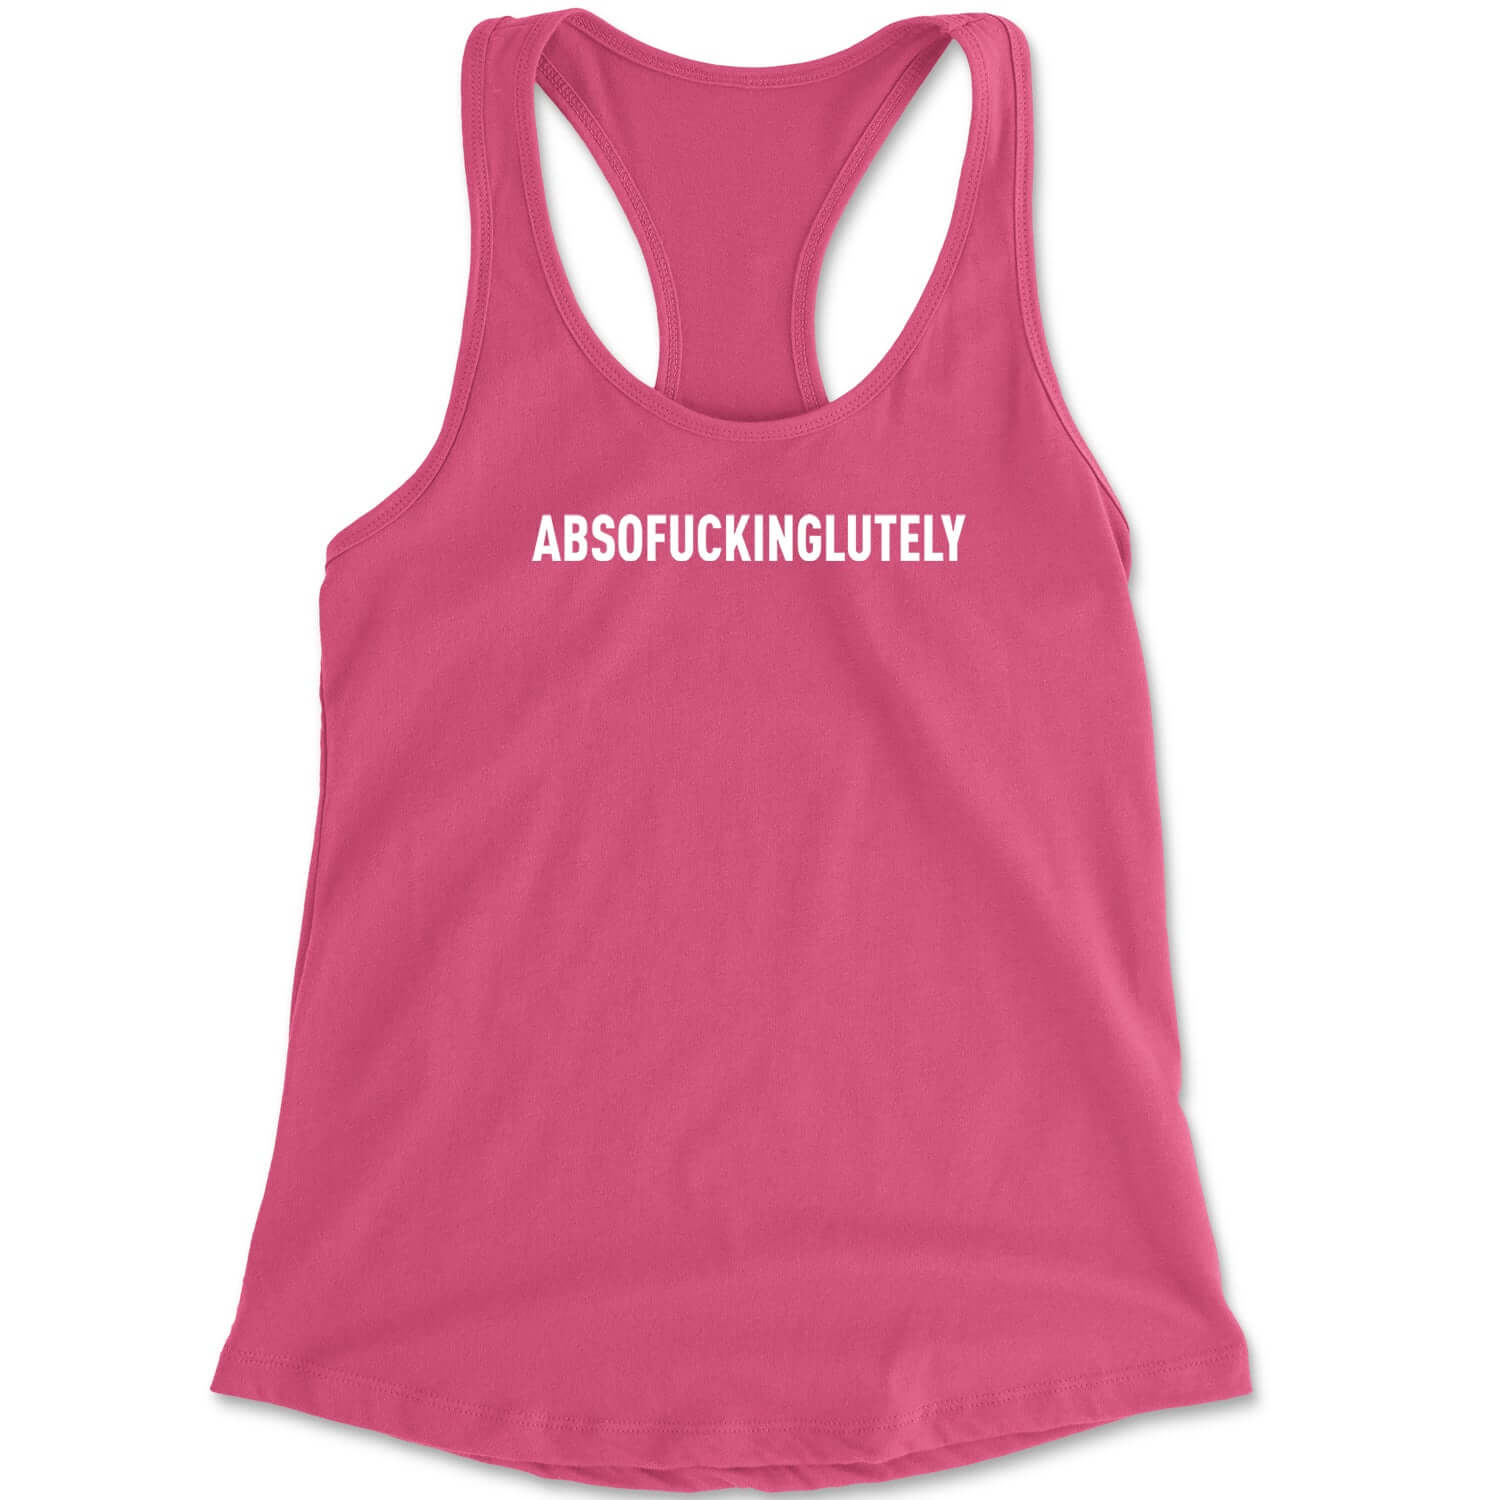 Abso f-cking lutely Racerback Tank Top for Women funny, shirt by Expression Tees